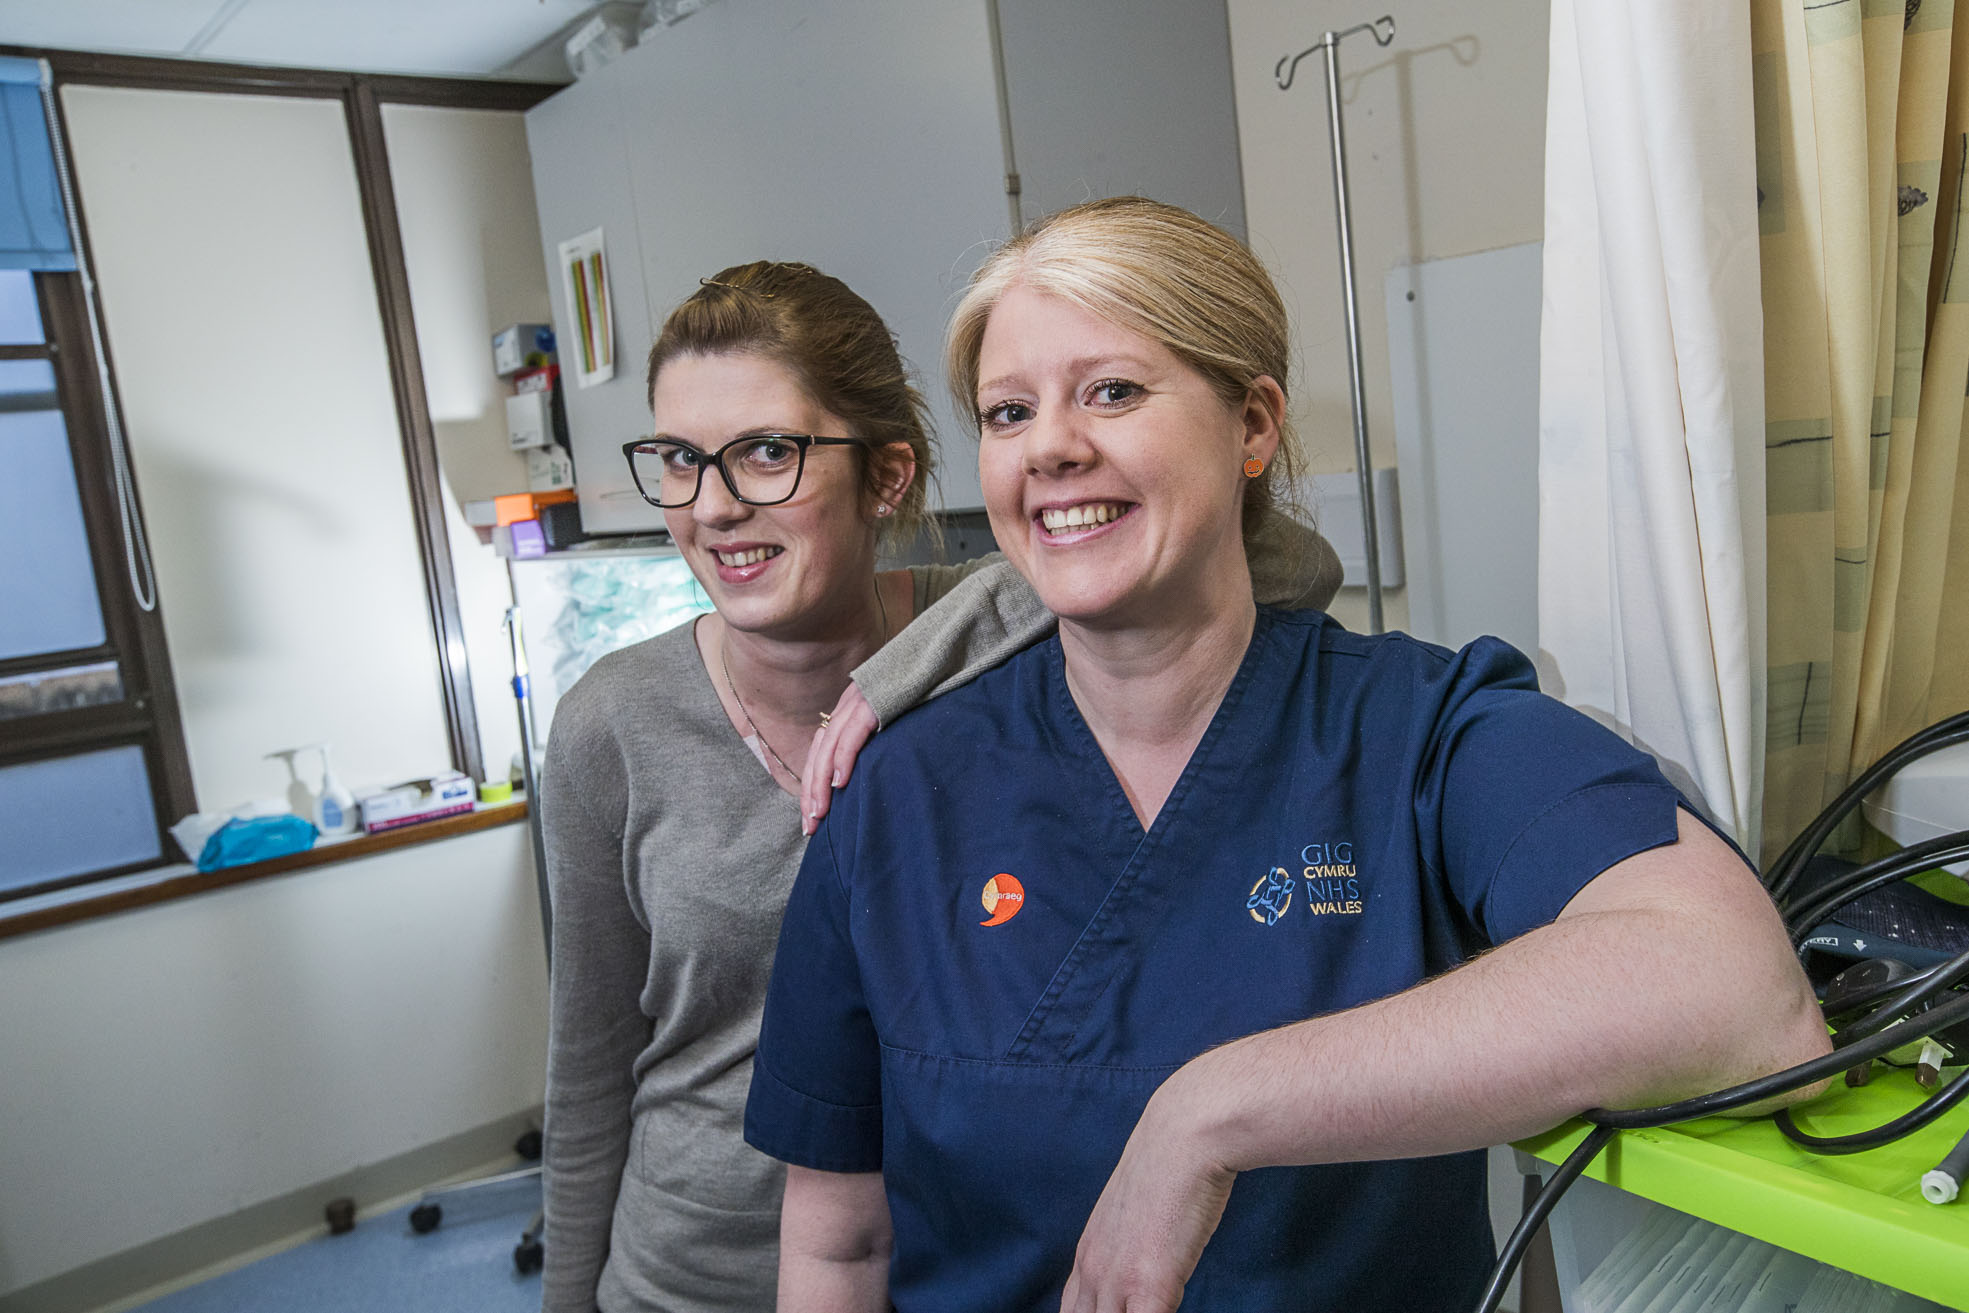 Nurse celebrates double award success thanks to the patient she helped treat